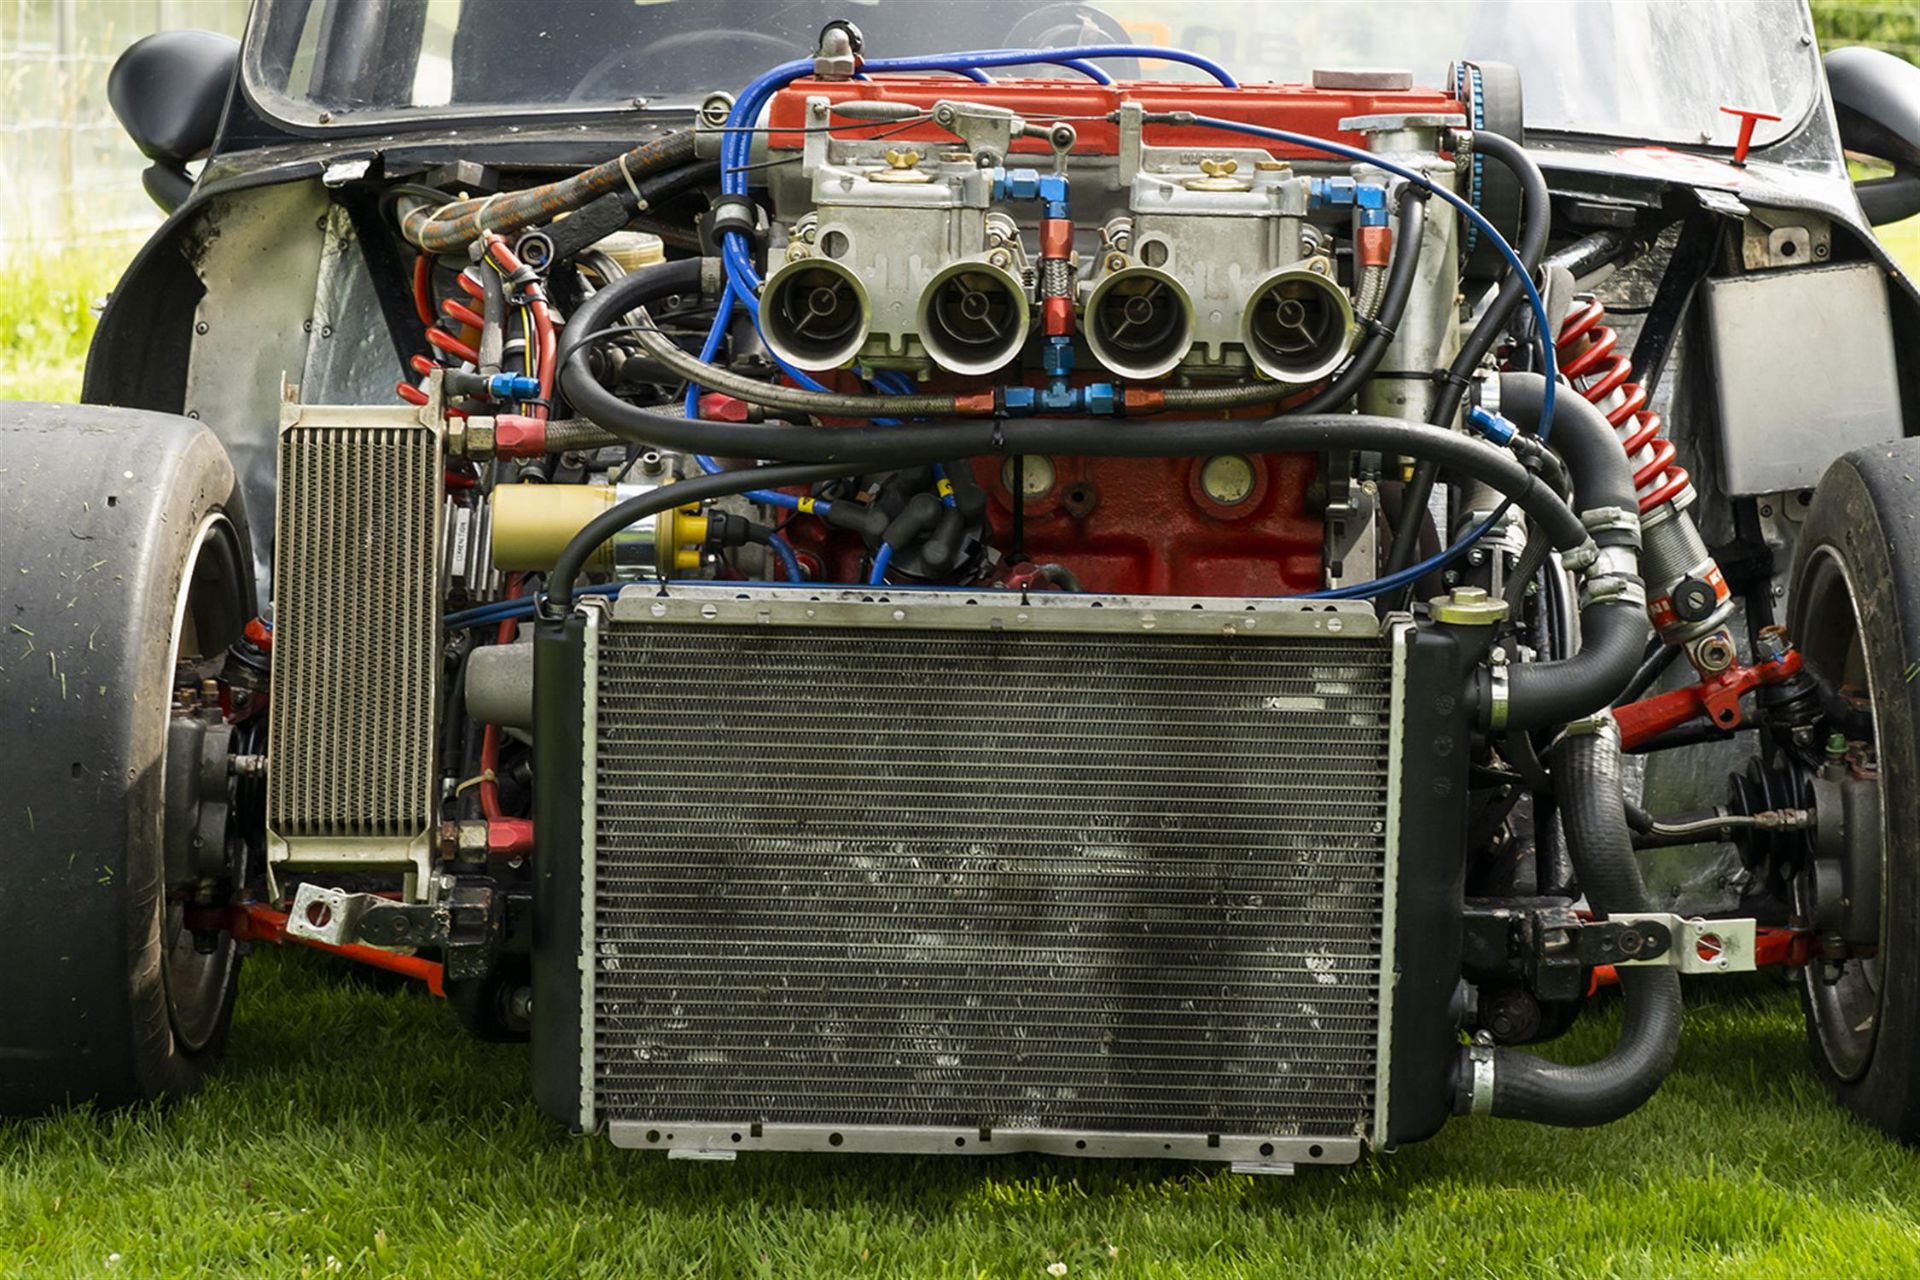 1979 Maguire Mini Twin-Cam TS.79.DH - Image 10 of 10